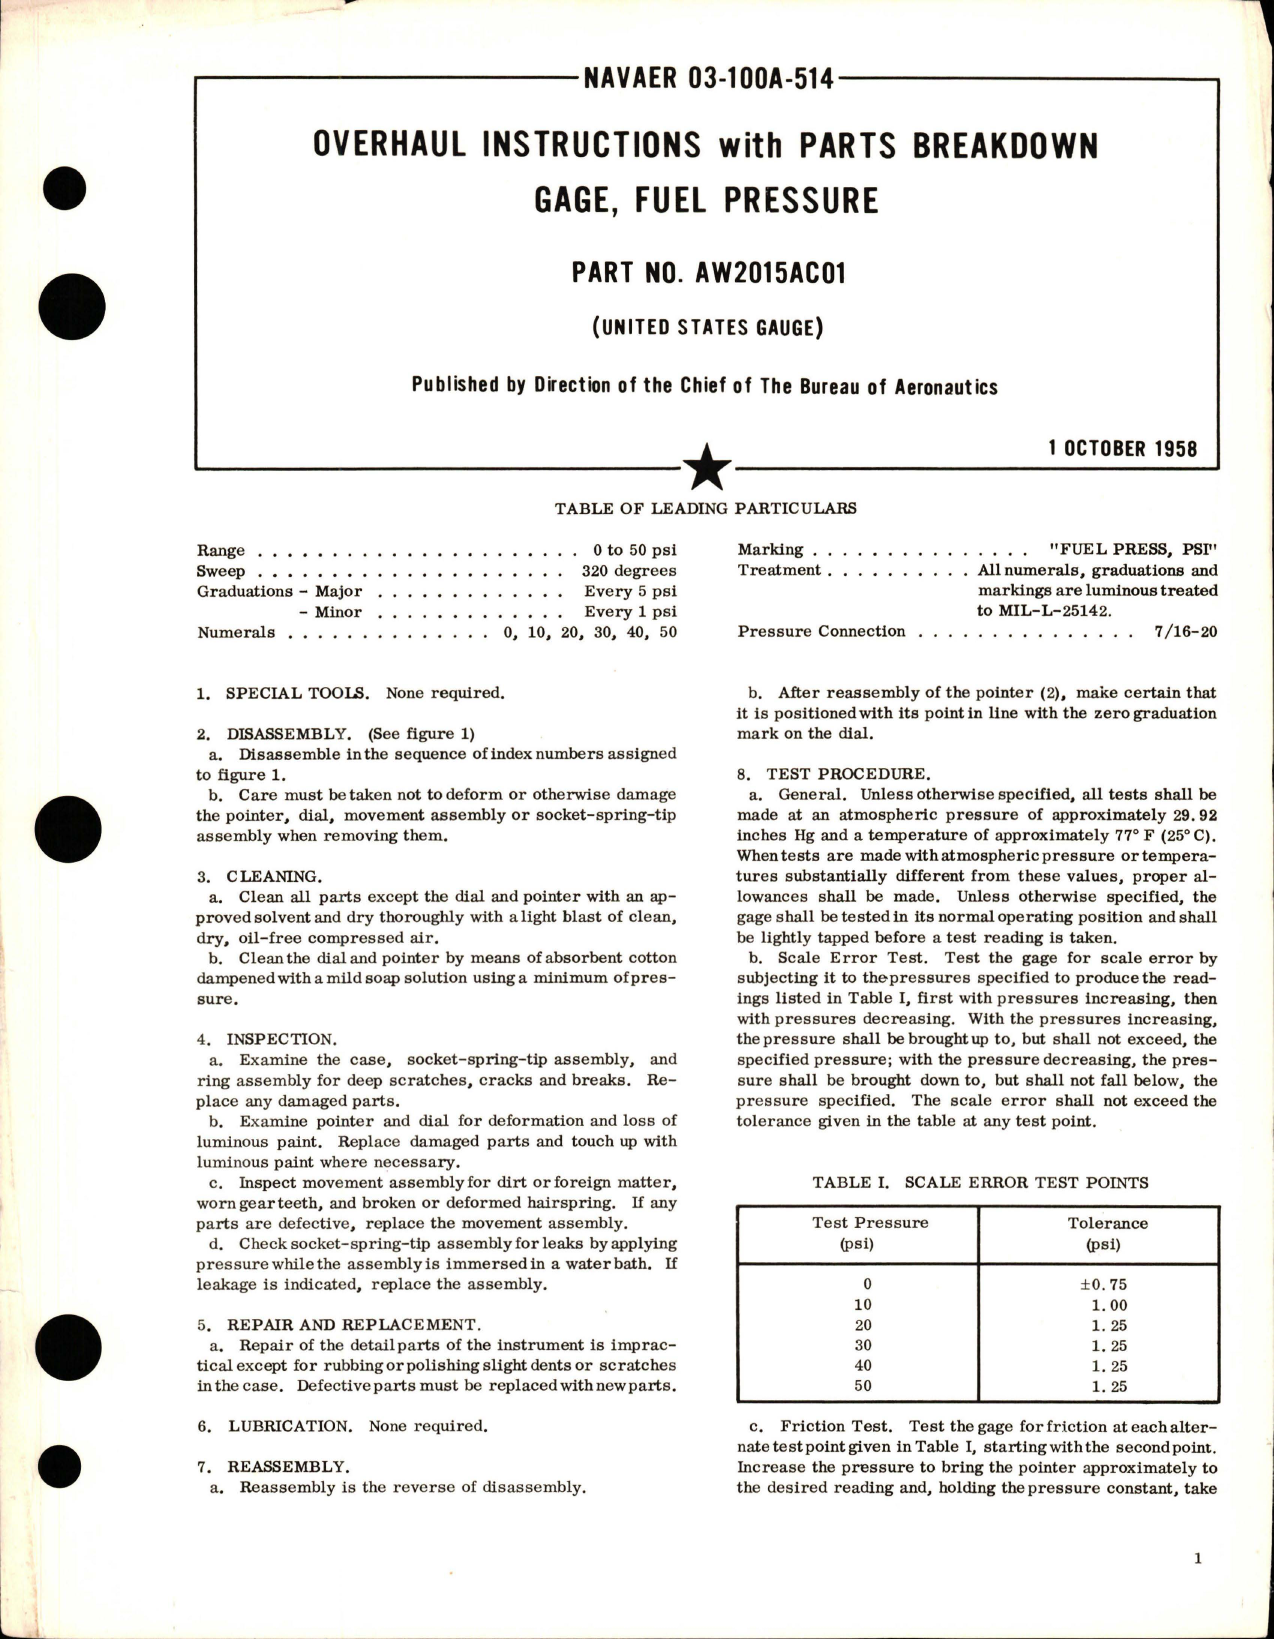 Sample page 1 from AirCorps Library document: Overhaul Instructions with Parts Breakdown for Fuel Pressure Gage - Part AW2015AC01 